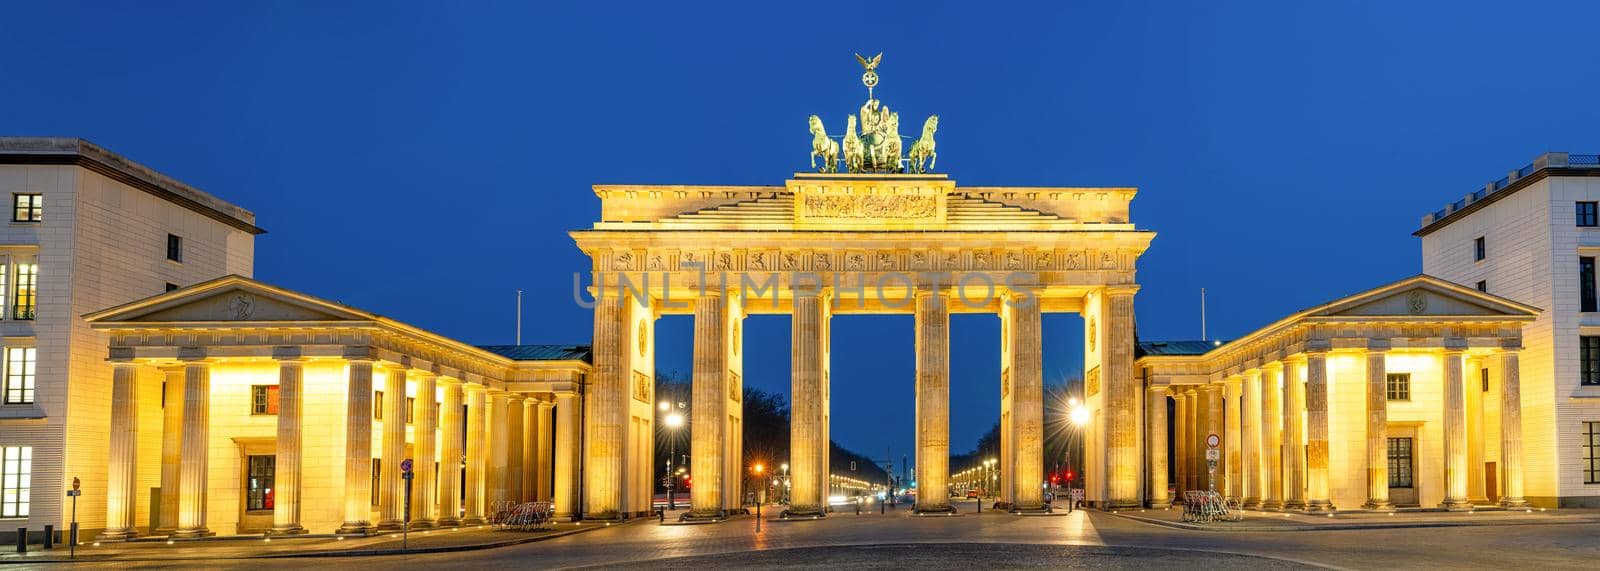 Panorama of the famous Brandenburg Gate by elxeneize